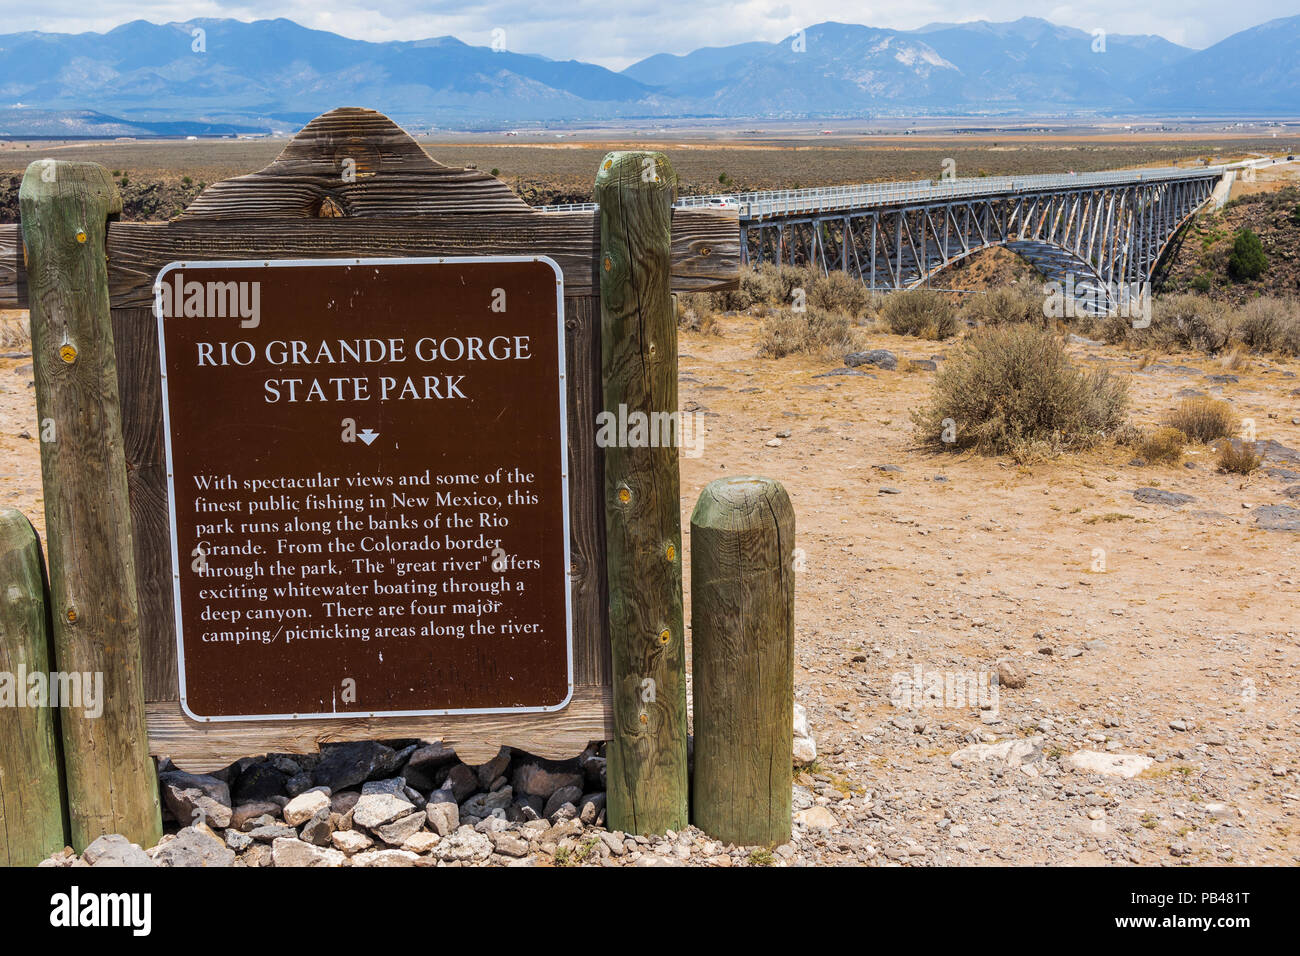 Taos Nm Usa 6 July 18 A Descriptive Sign At The Rio Grande Gorge Bridge On Us 64 South Of Taos The Second Highest Bridge In The Us Hwy System Stock Photo Alamy